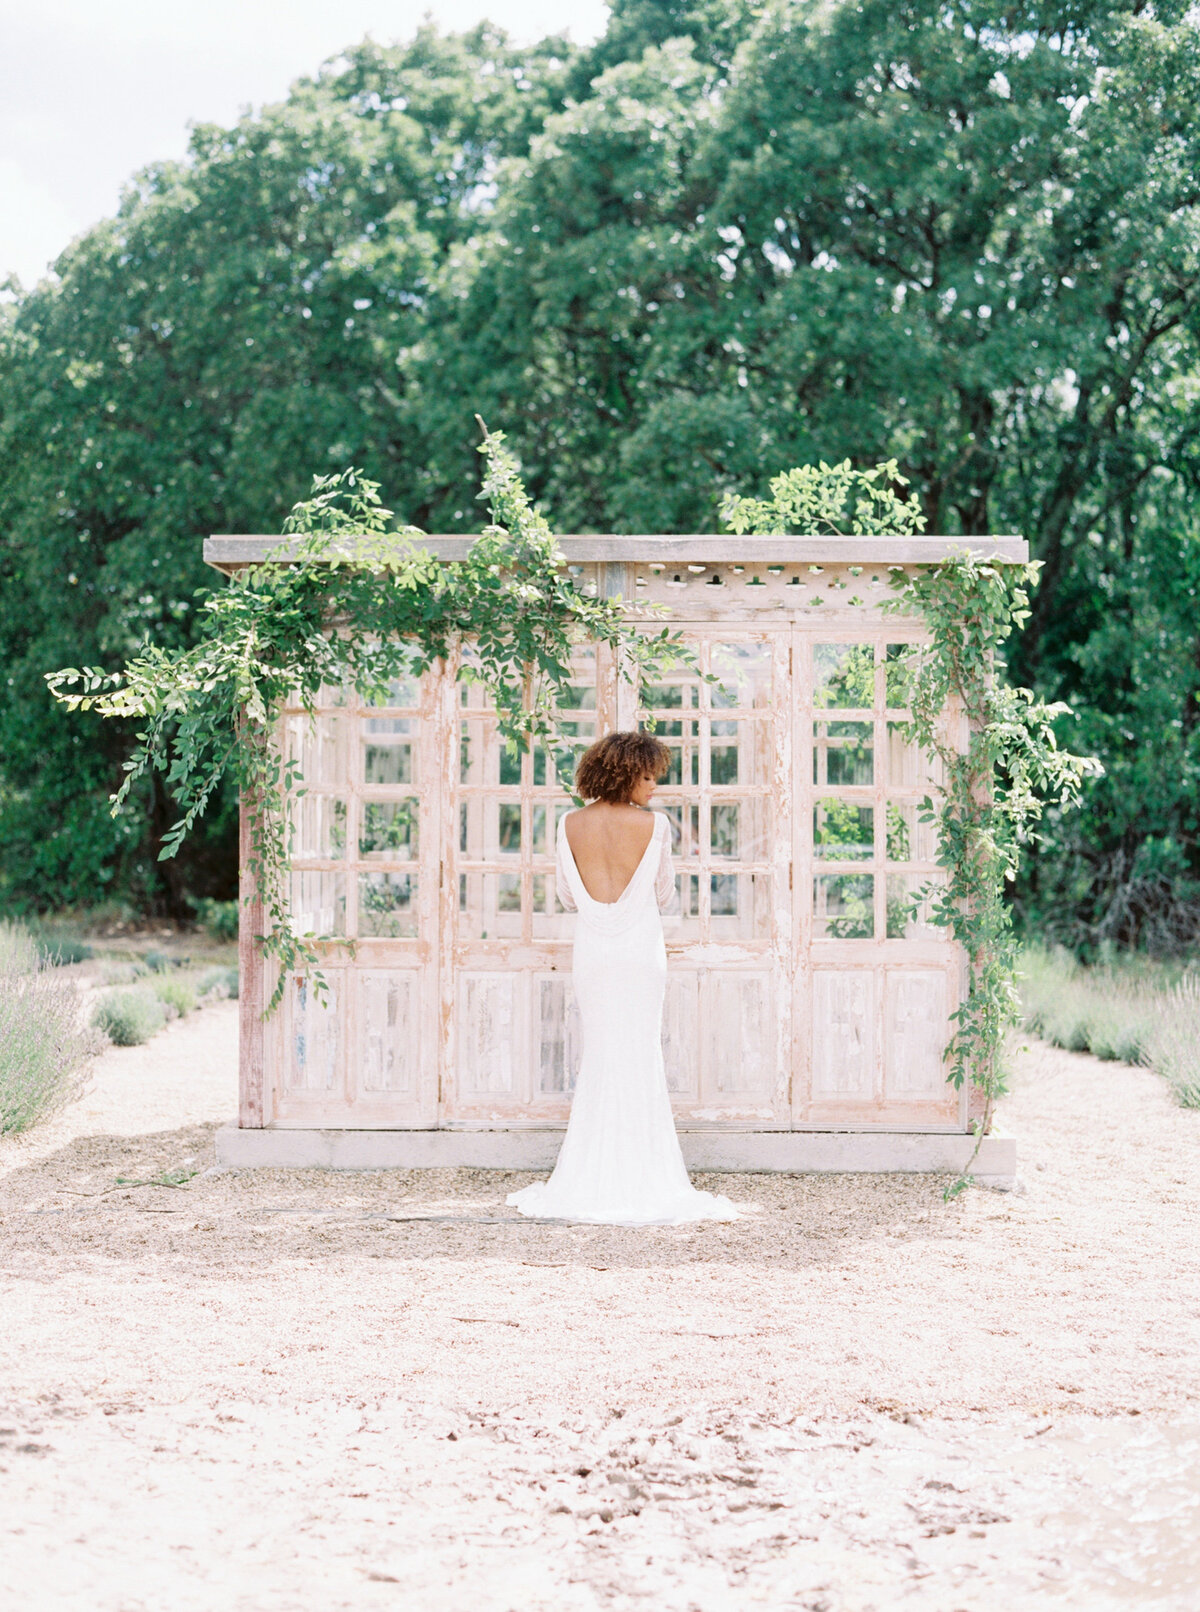 Allora & Ivy Event Co |  Dallas Wedding Planners & Event Designers | Lavender Fields Inspiration at The White Sparrow